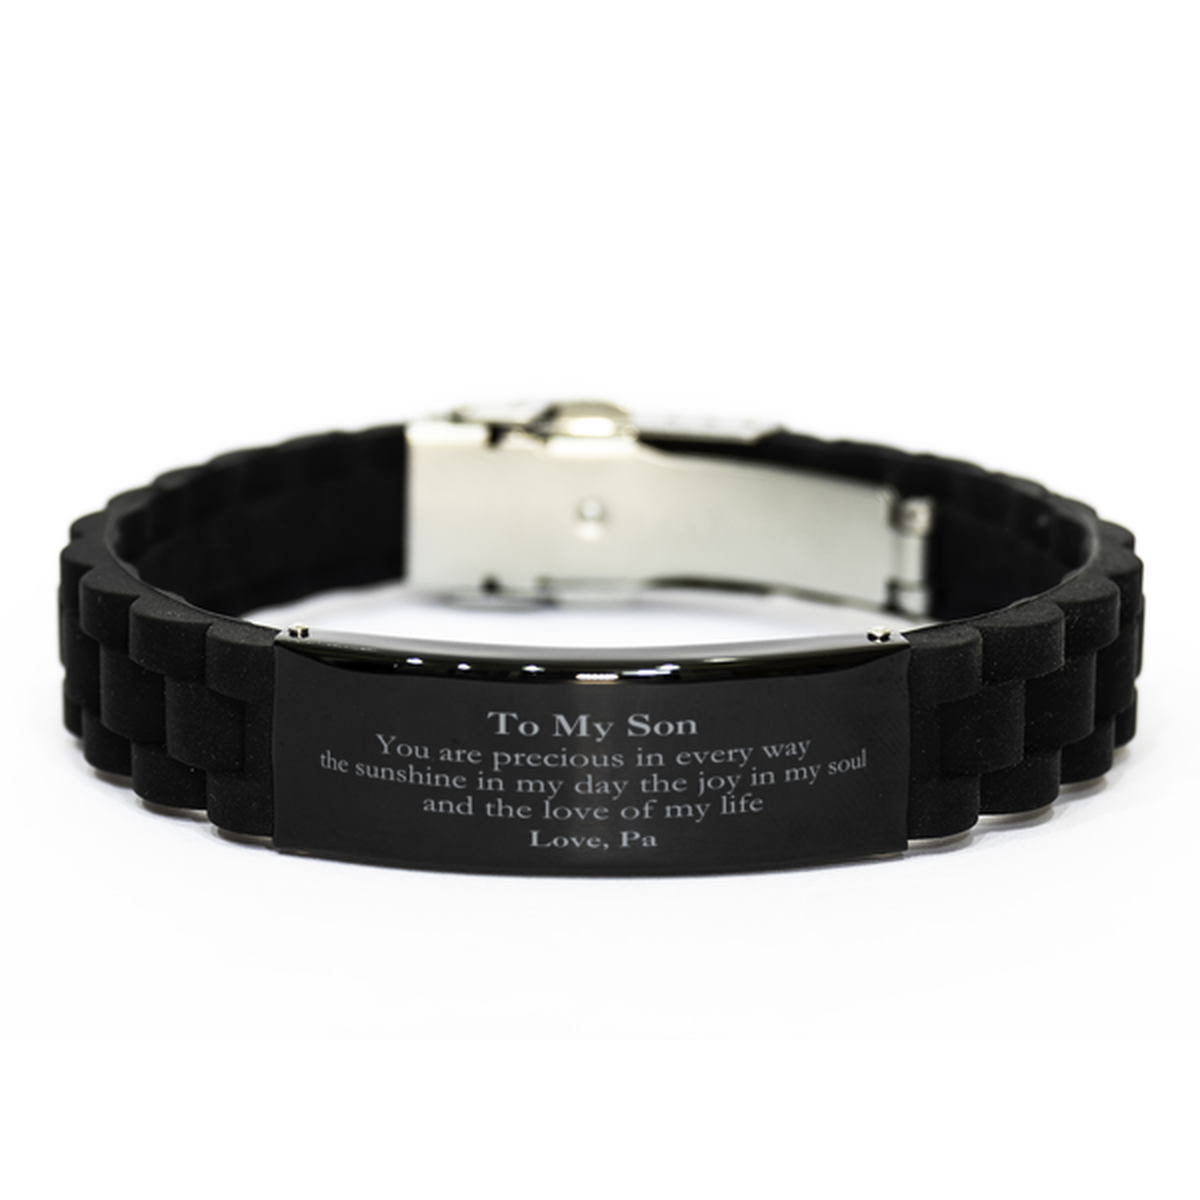 Graduation Gifts for Son Black Glidelock Clasp Bracelet Present from Pa, Christmas Son Birthday Gifts Son You are precious in every way the sunshine in my day. Love, Pa